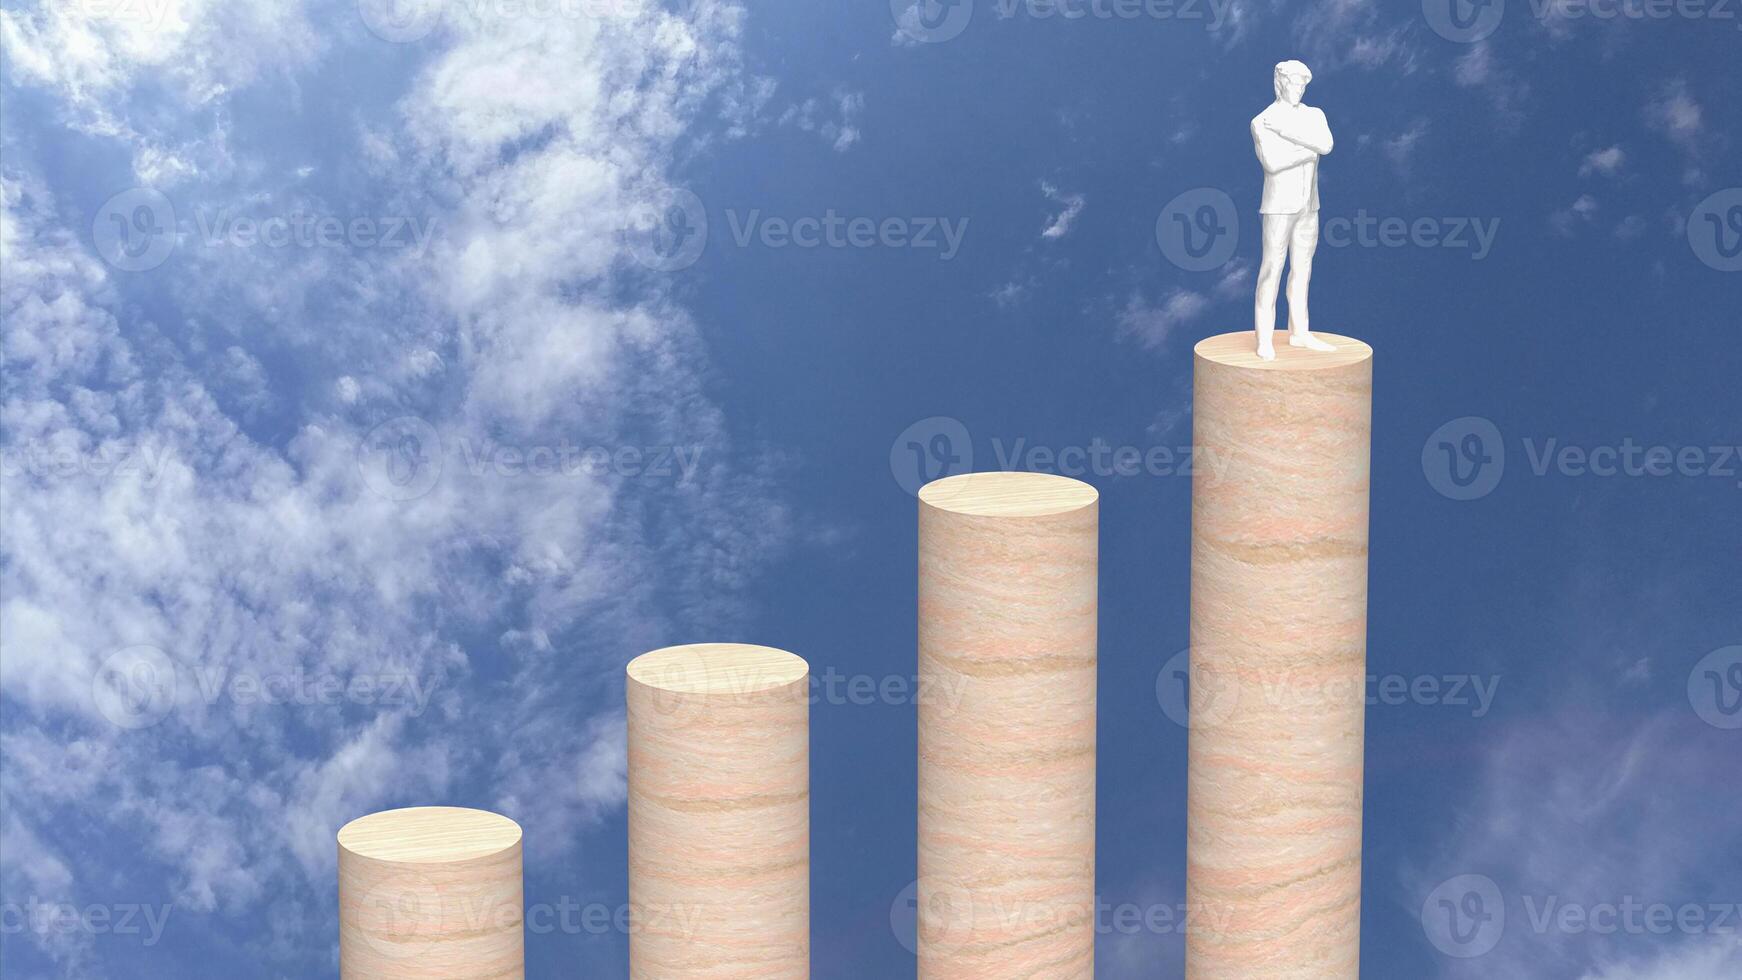 The Business man on wood chart sky Background  3d rendering. photo